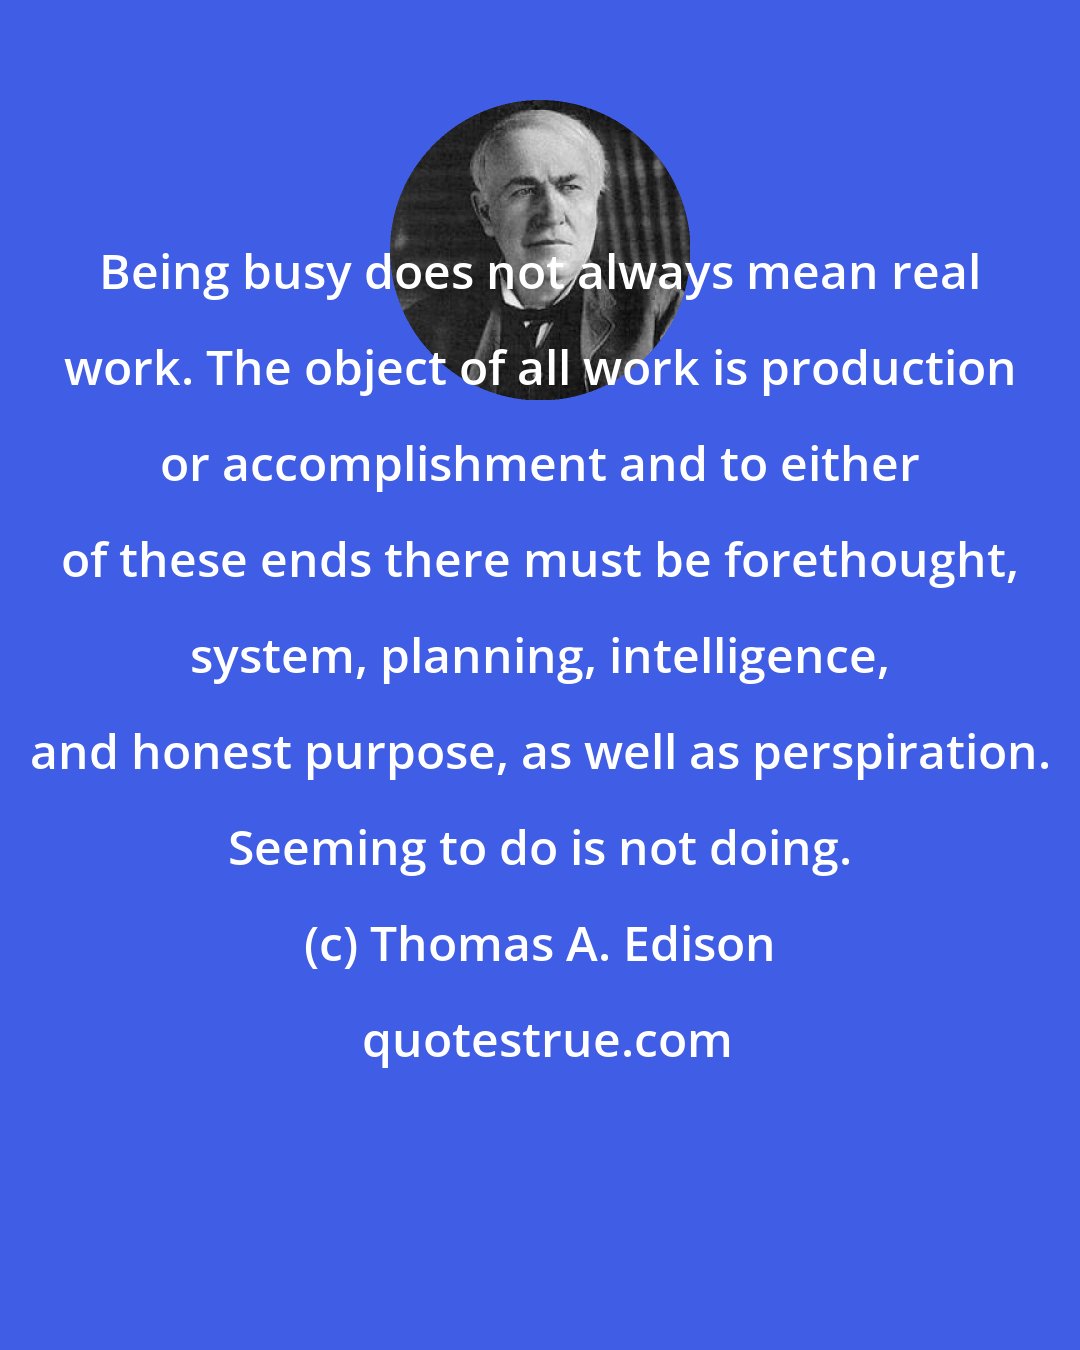 Thomas A. Edison: Being busy does not always mean real work. The object of all work is production or accomplishment and to either of these ends there must be forethought, system, planning, intelligence, and honest purpose, as well as perspiration. Seeming to do is not doing.